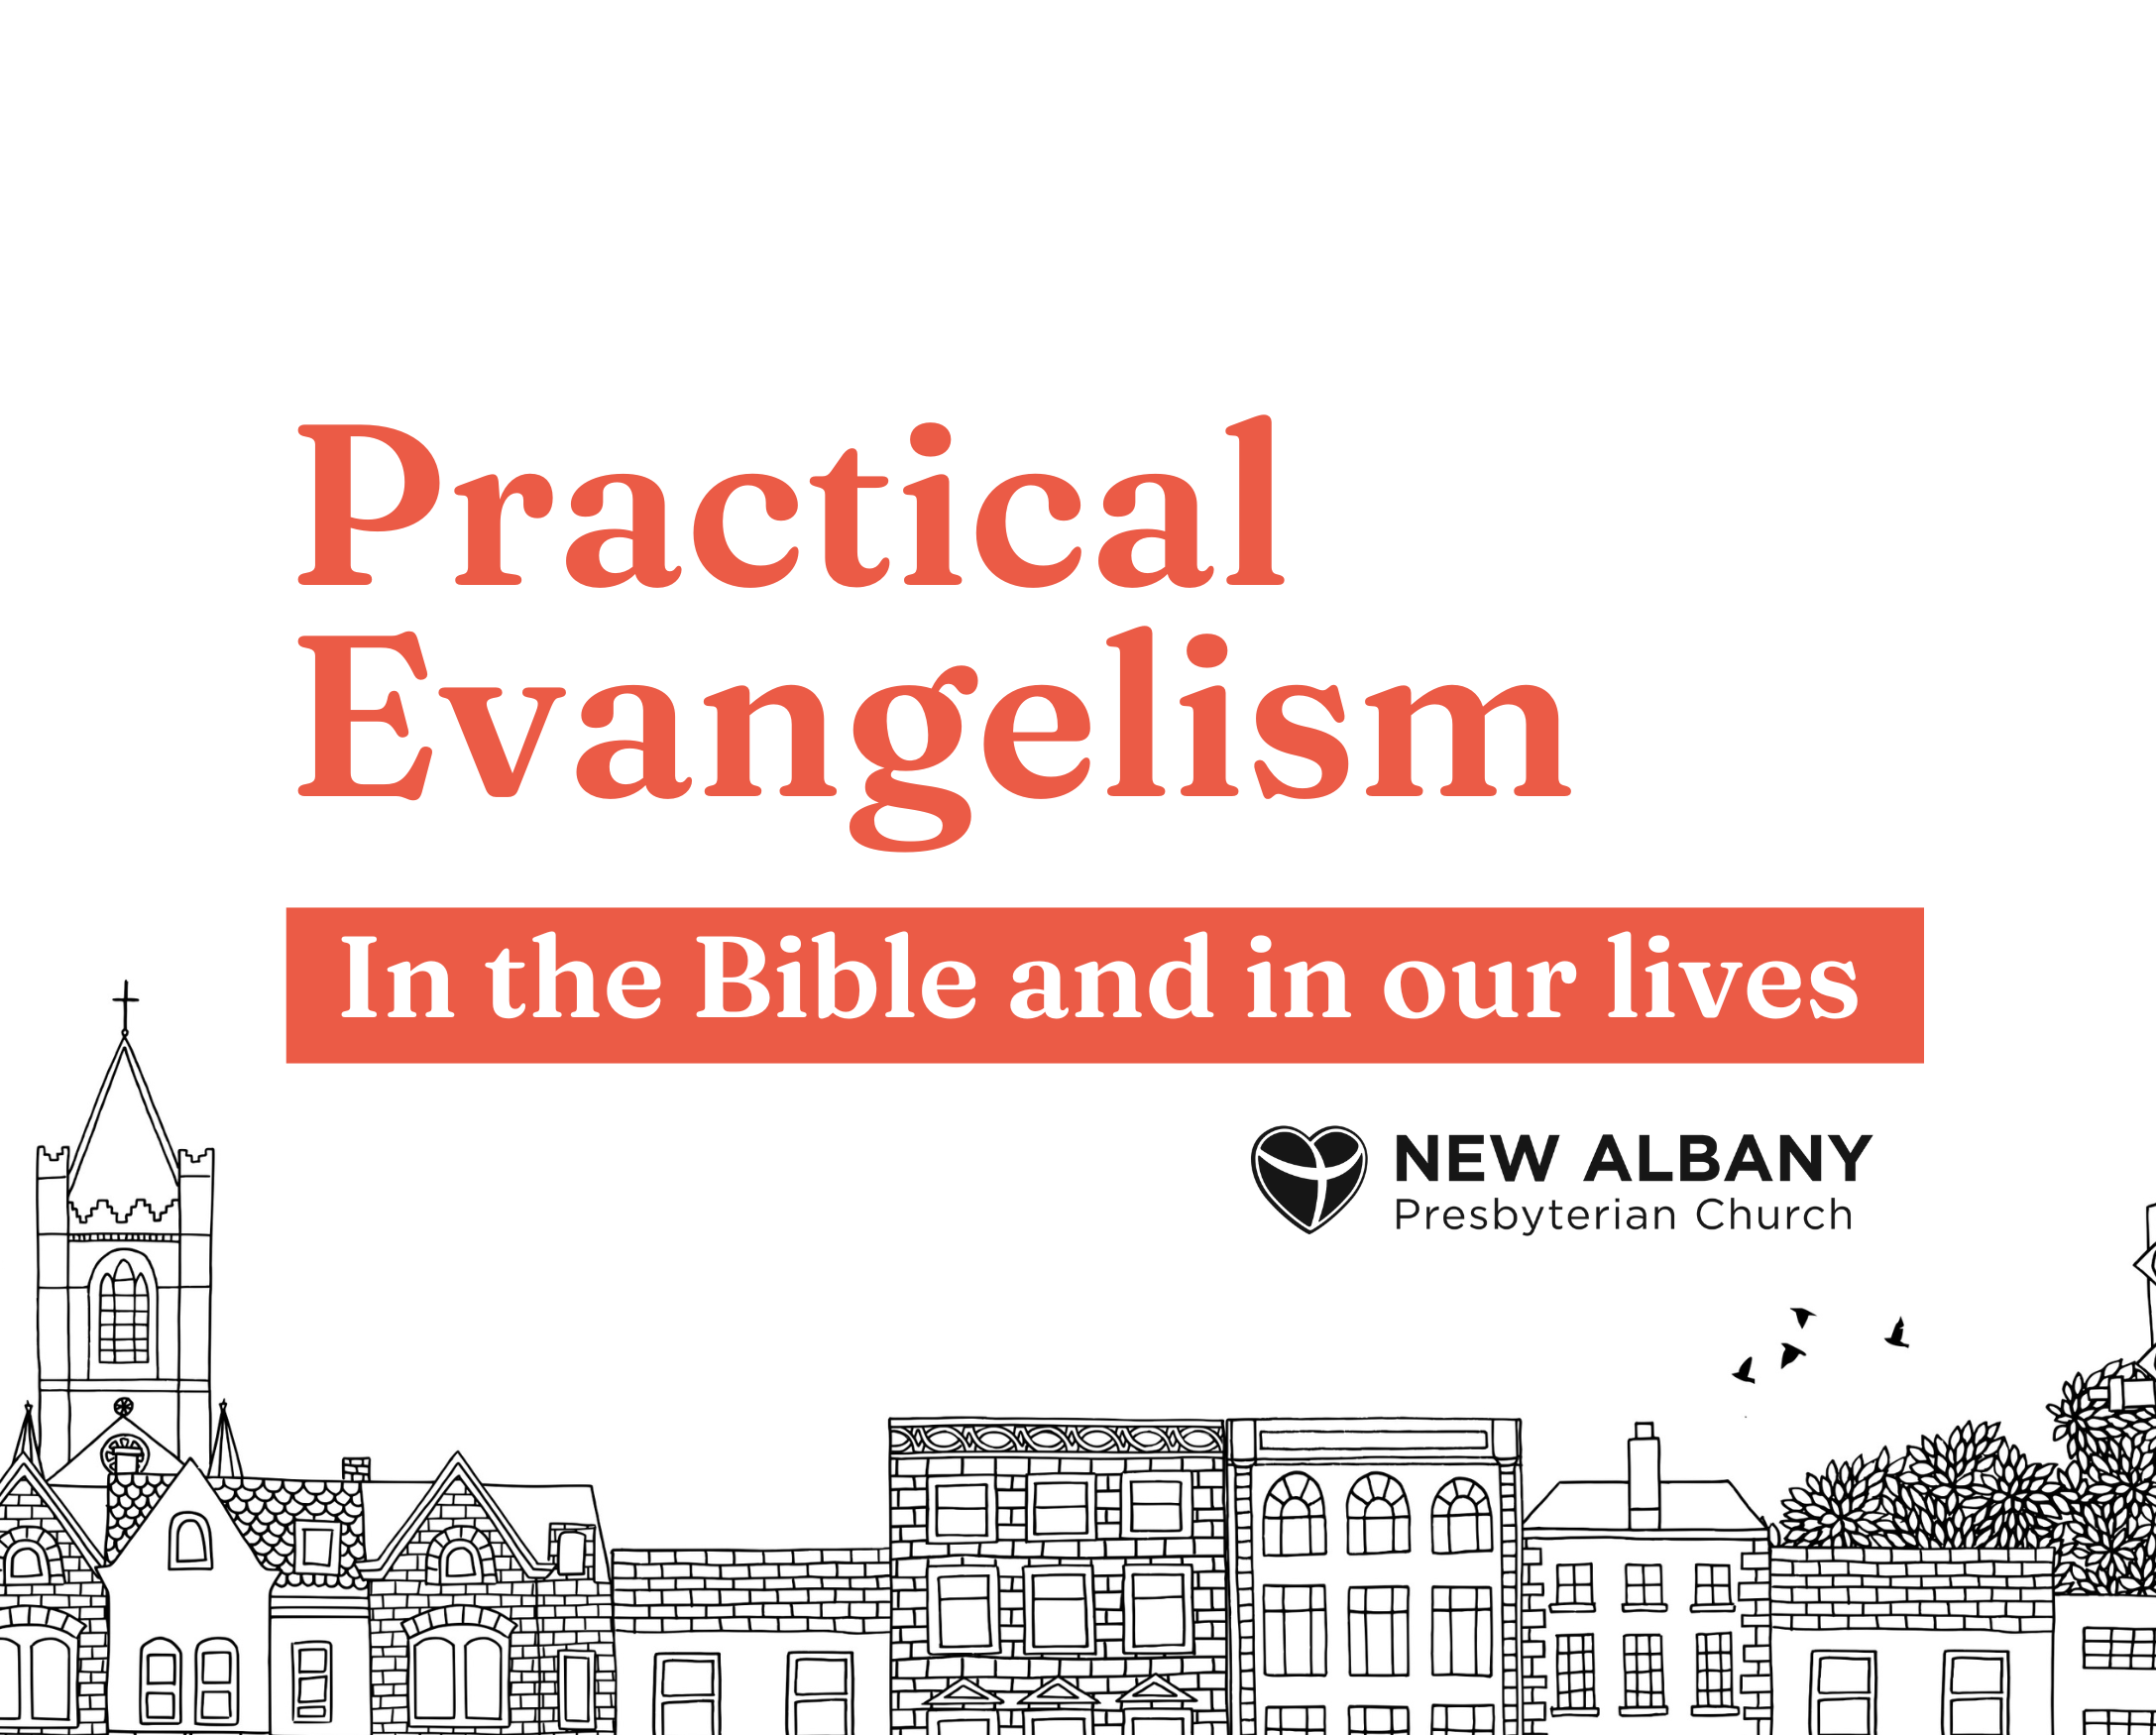 Practical Evangelism in the Bible and our lives: Presence: Jesus and sinners